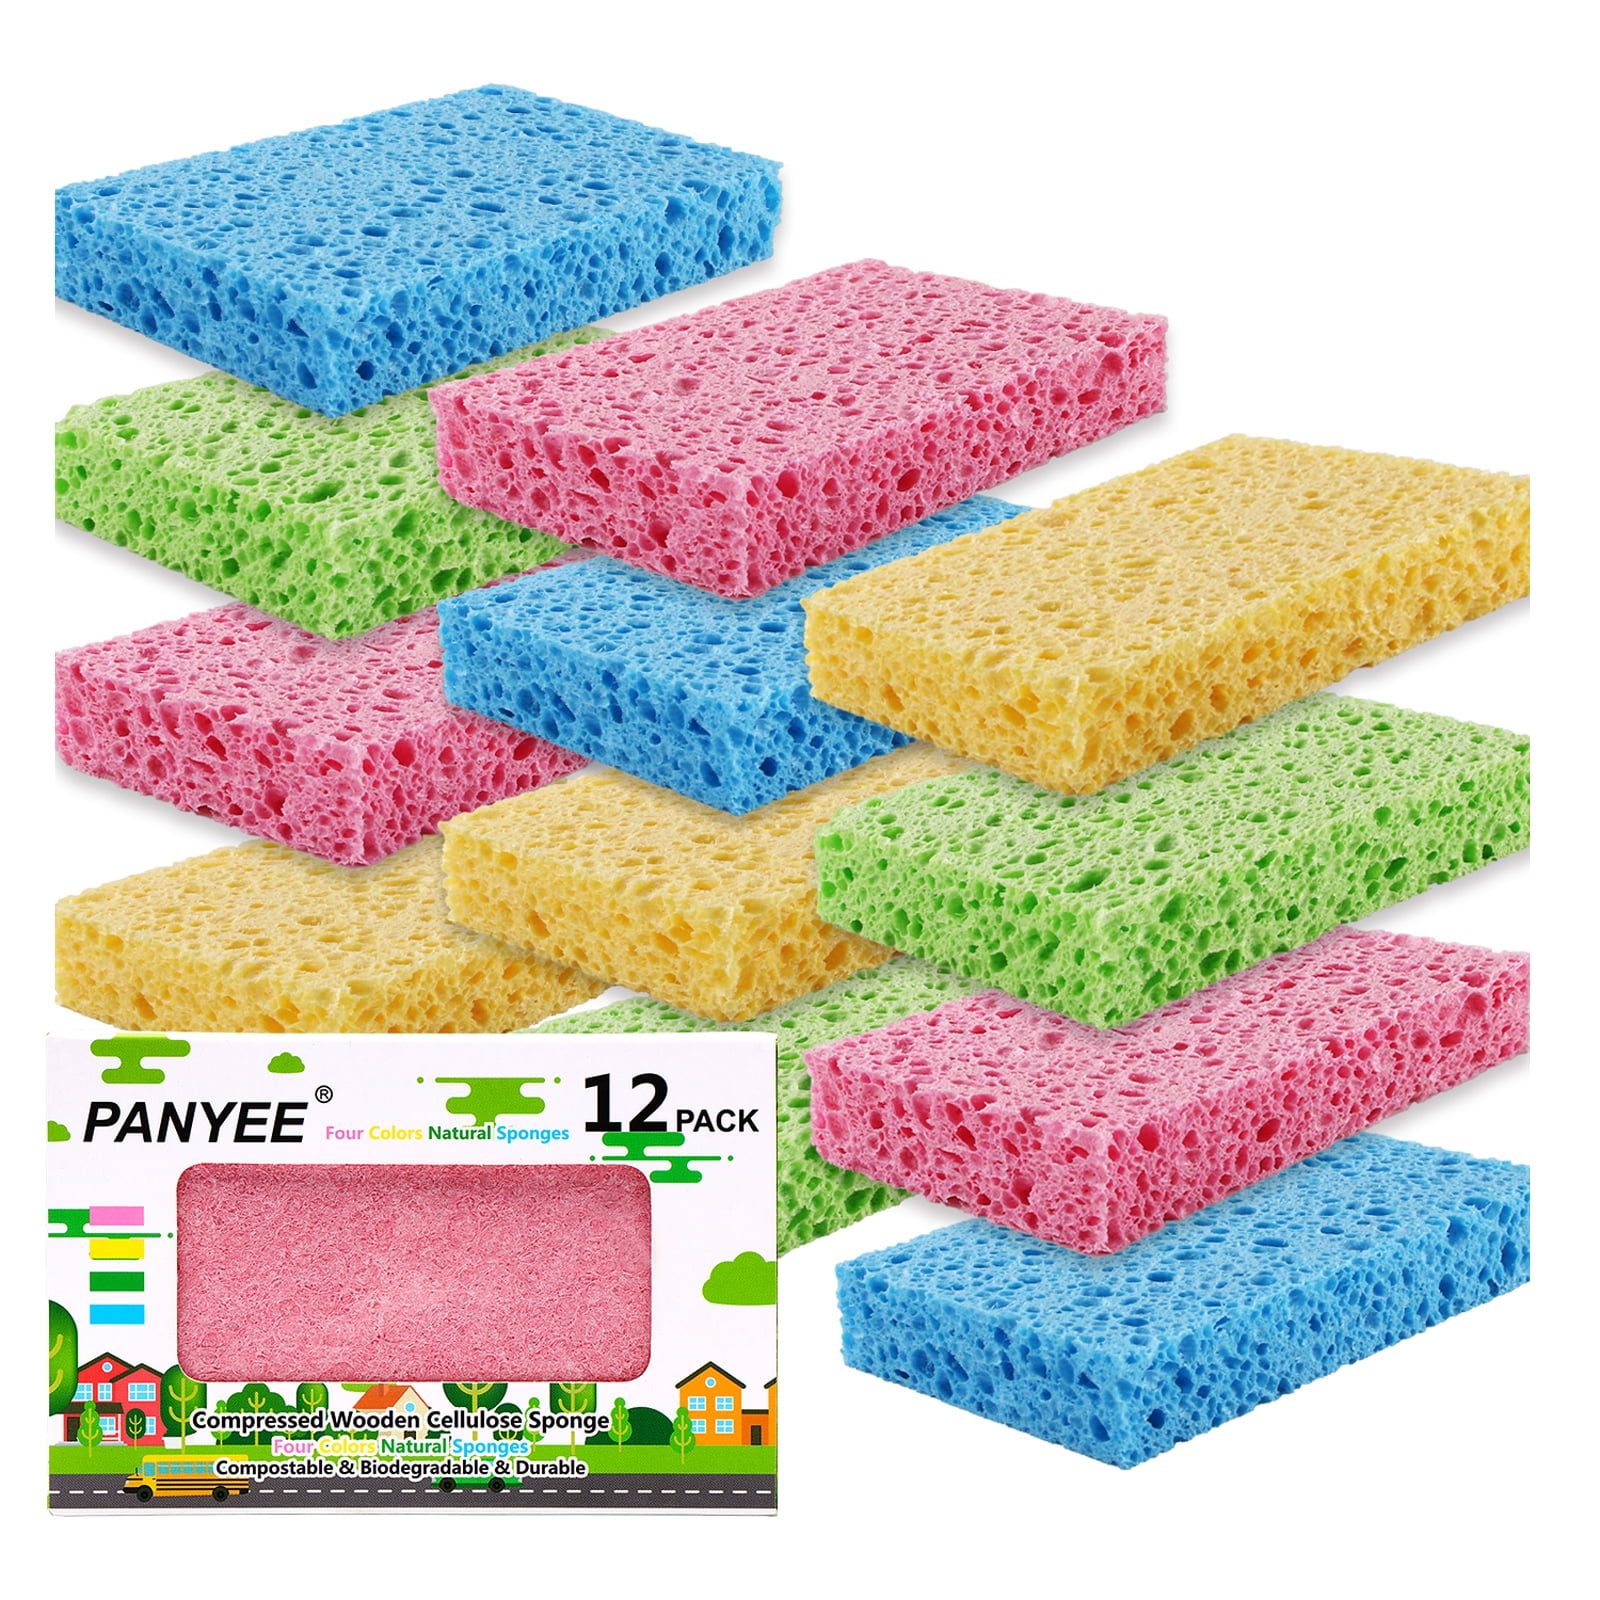 SCRUB DADDY COLORS 3 PACK & 2-4 Packs of Soft Sponges Cleaning Kitchen Sponge 